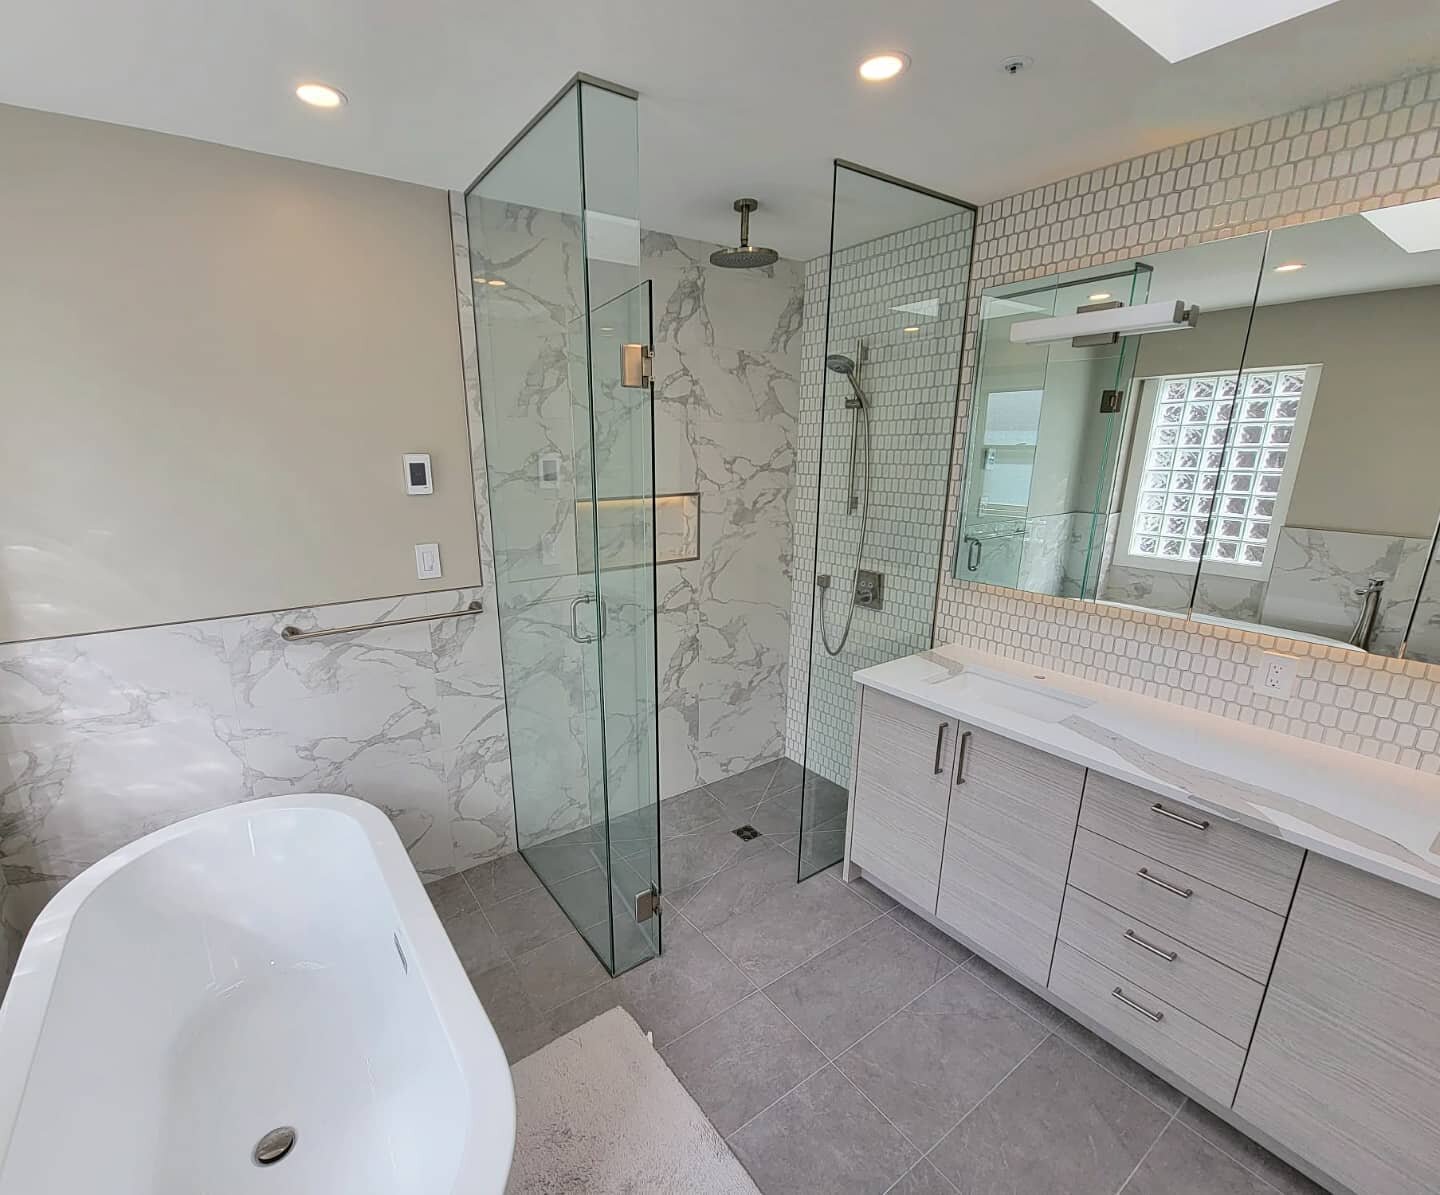 When you think of your dream bathroom, what do you picture? 😍

This bathroom offers a lot of space - from the double vanity with lots of available counter, to the large shower with glass panels and comfy bathtub - this is the kind of space that most